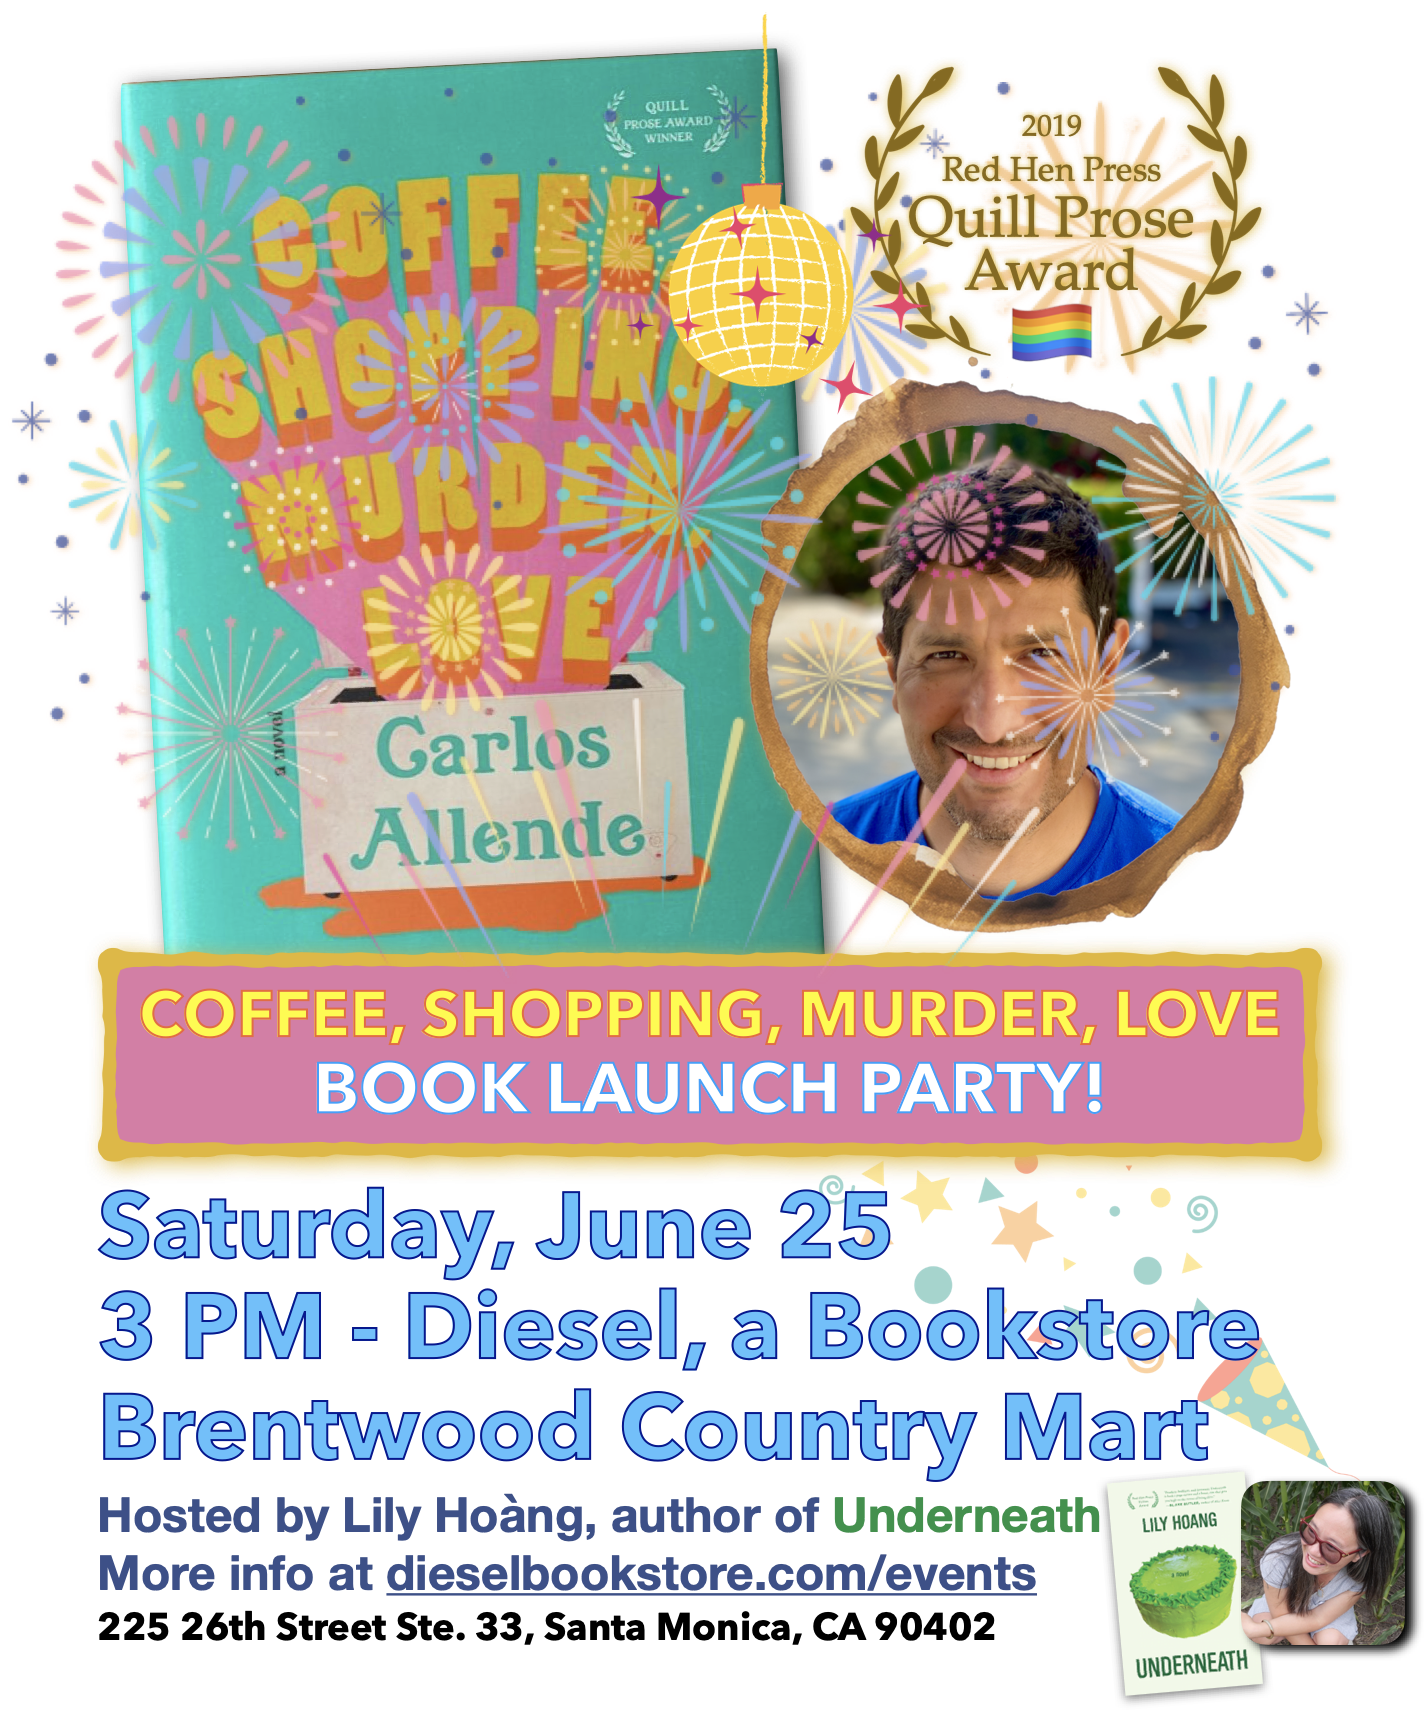 Coffee, Shopping, Murder, Love Book Launch Party at Diesel, a Bookstore. Saturday, June 25 at 3 PM. With Lily Hoang, author of Underneath.